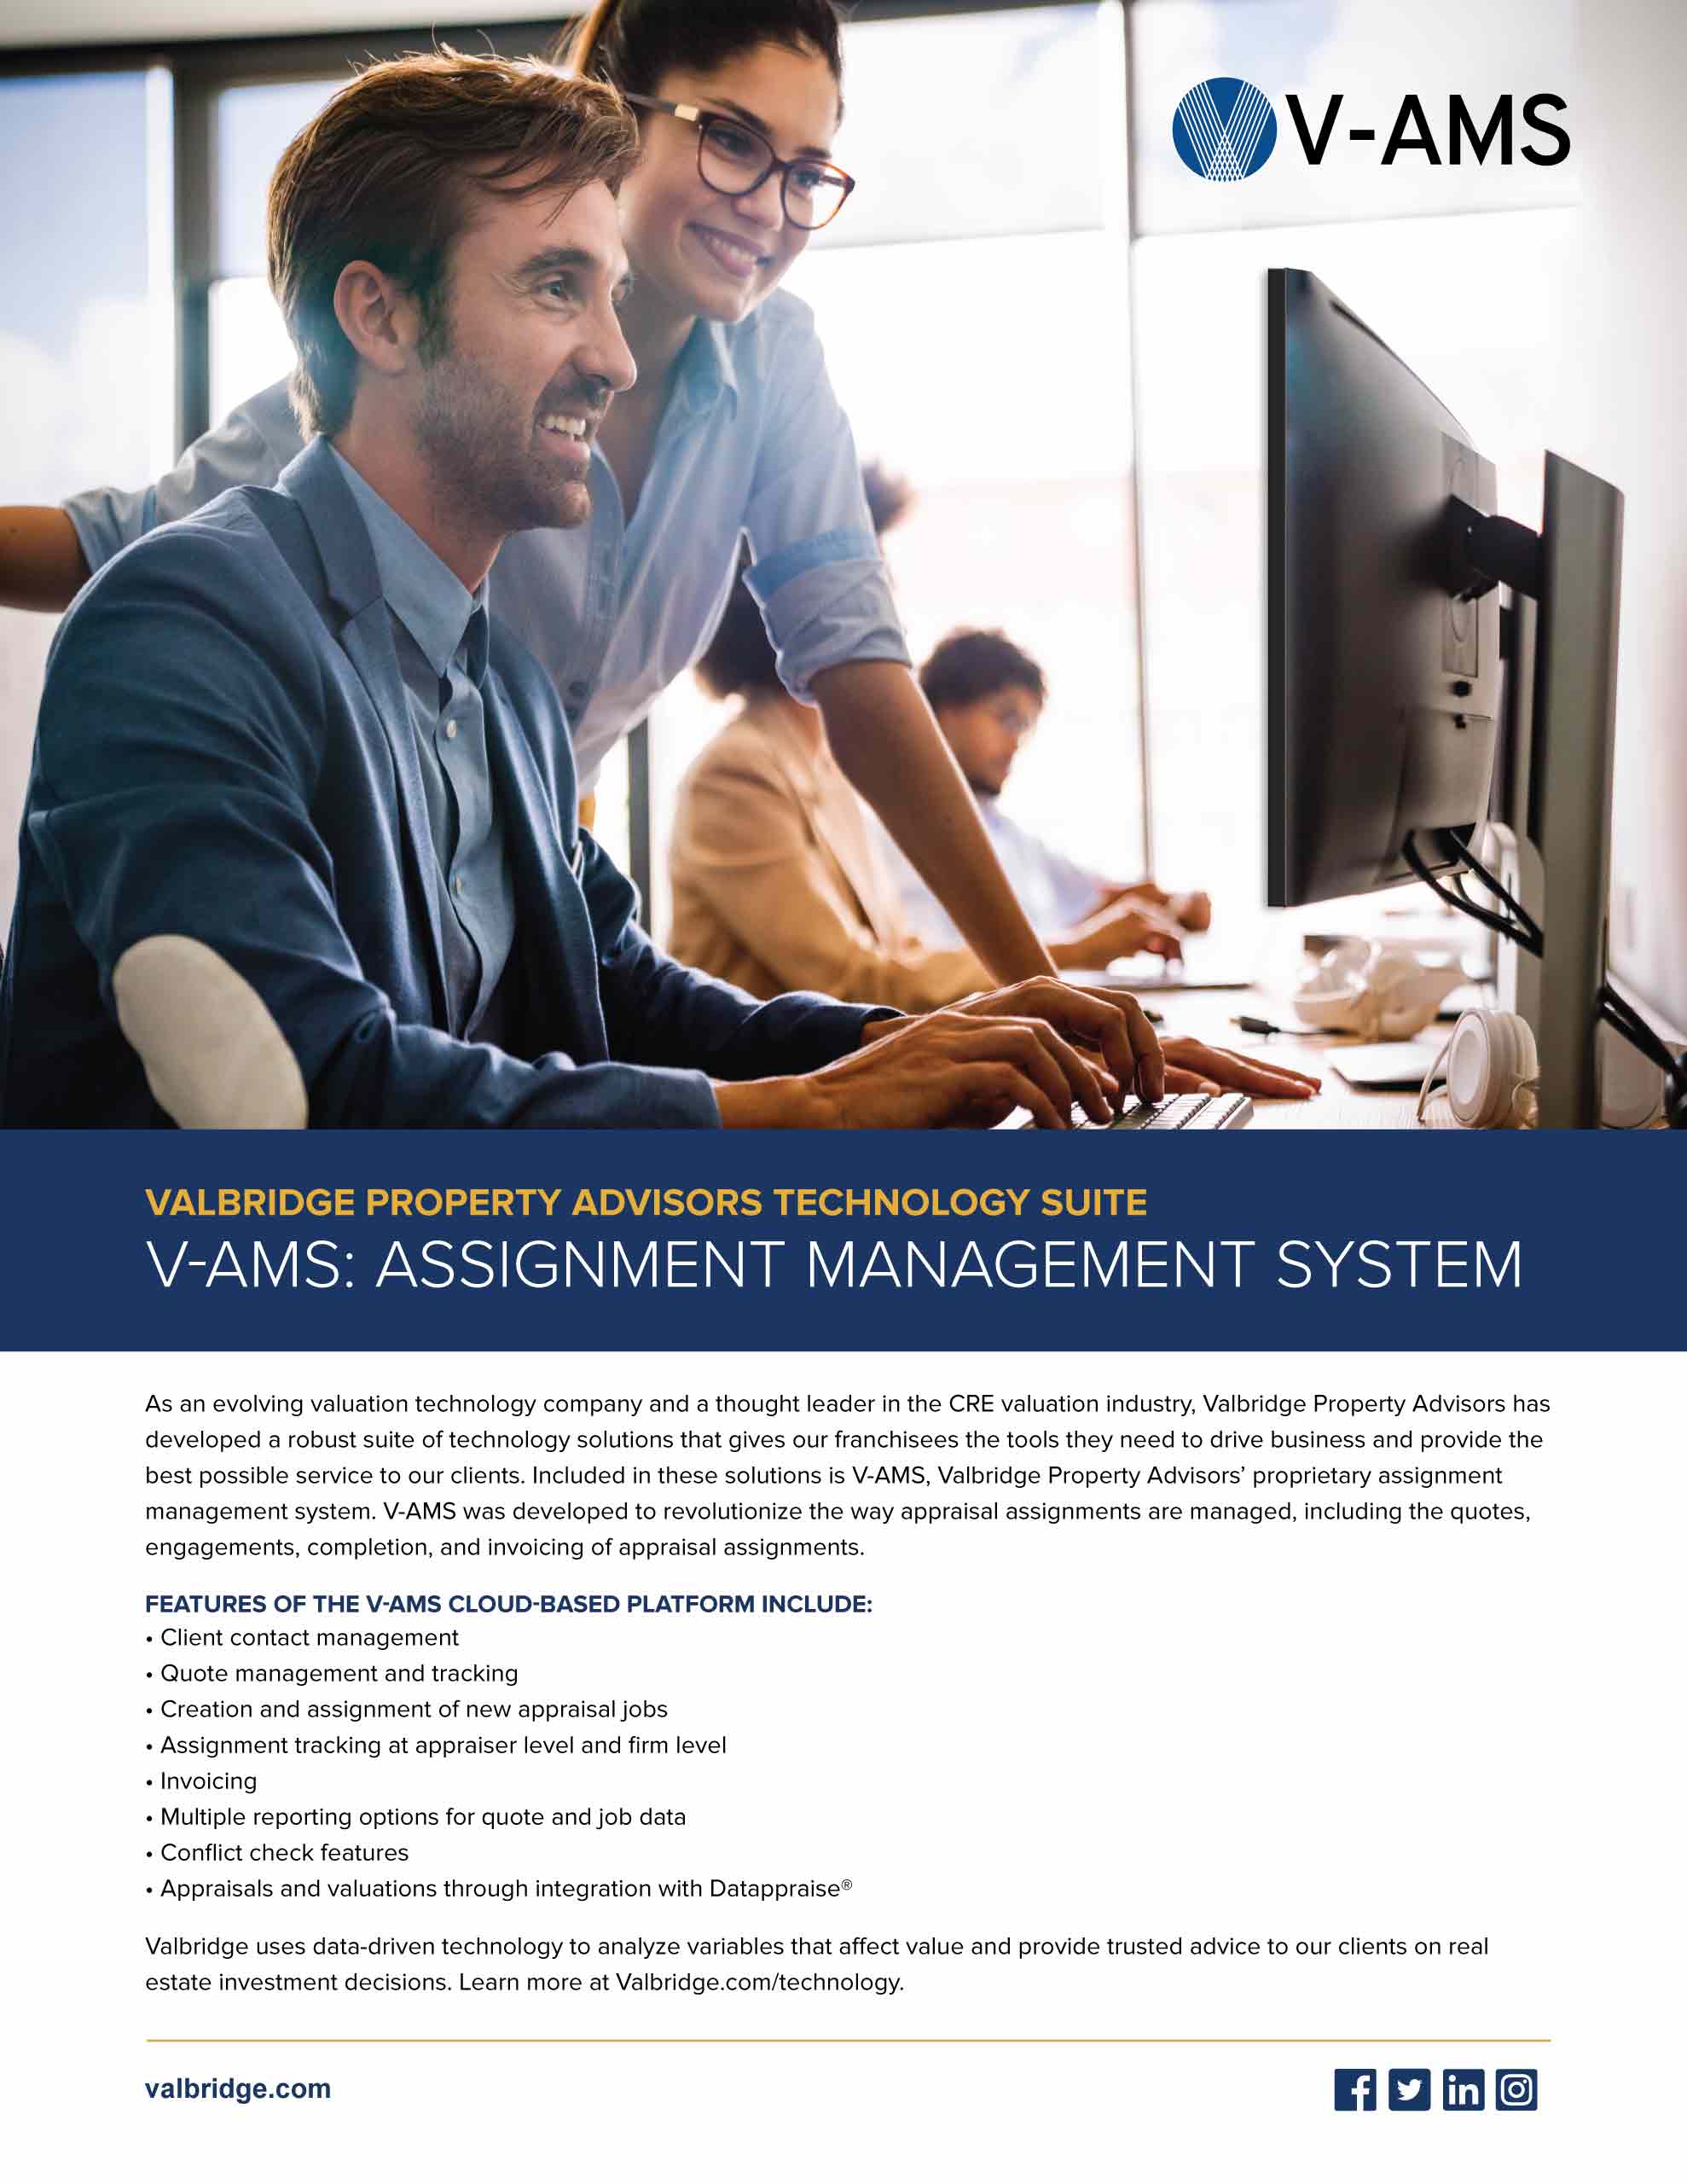 link to global assignment management system (ams)